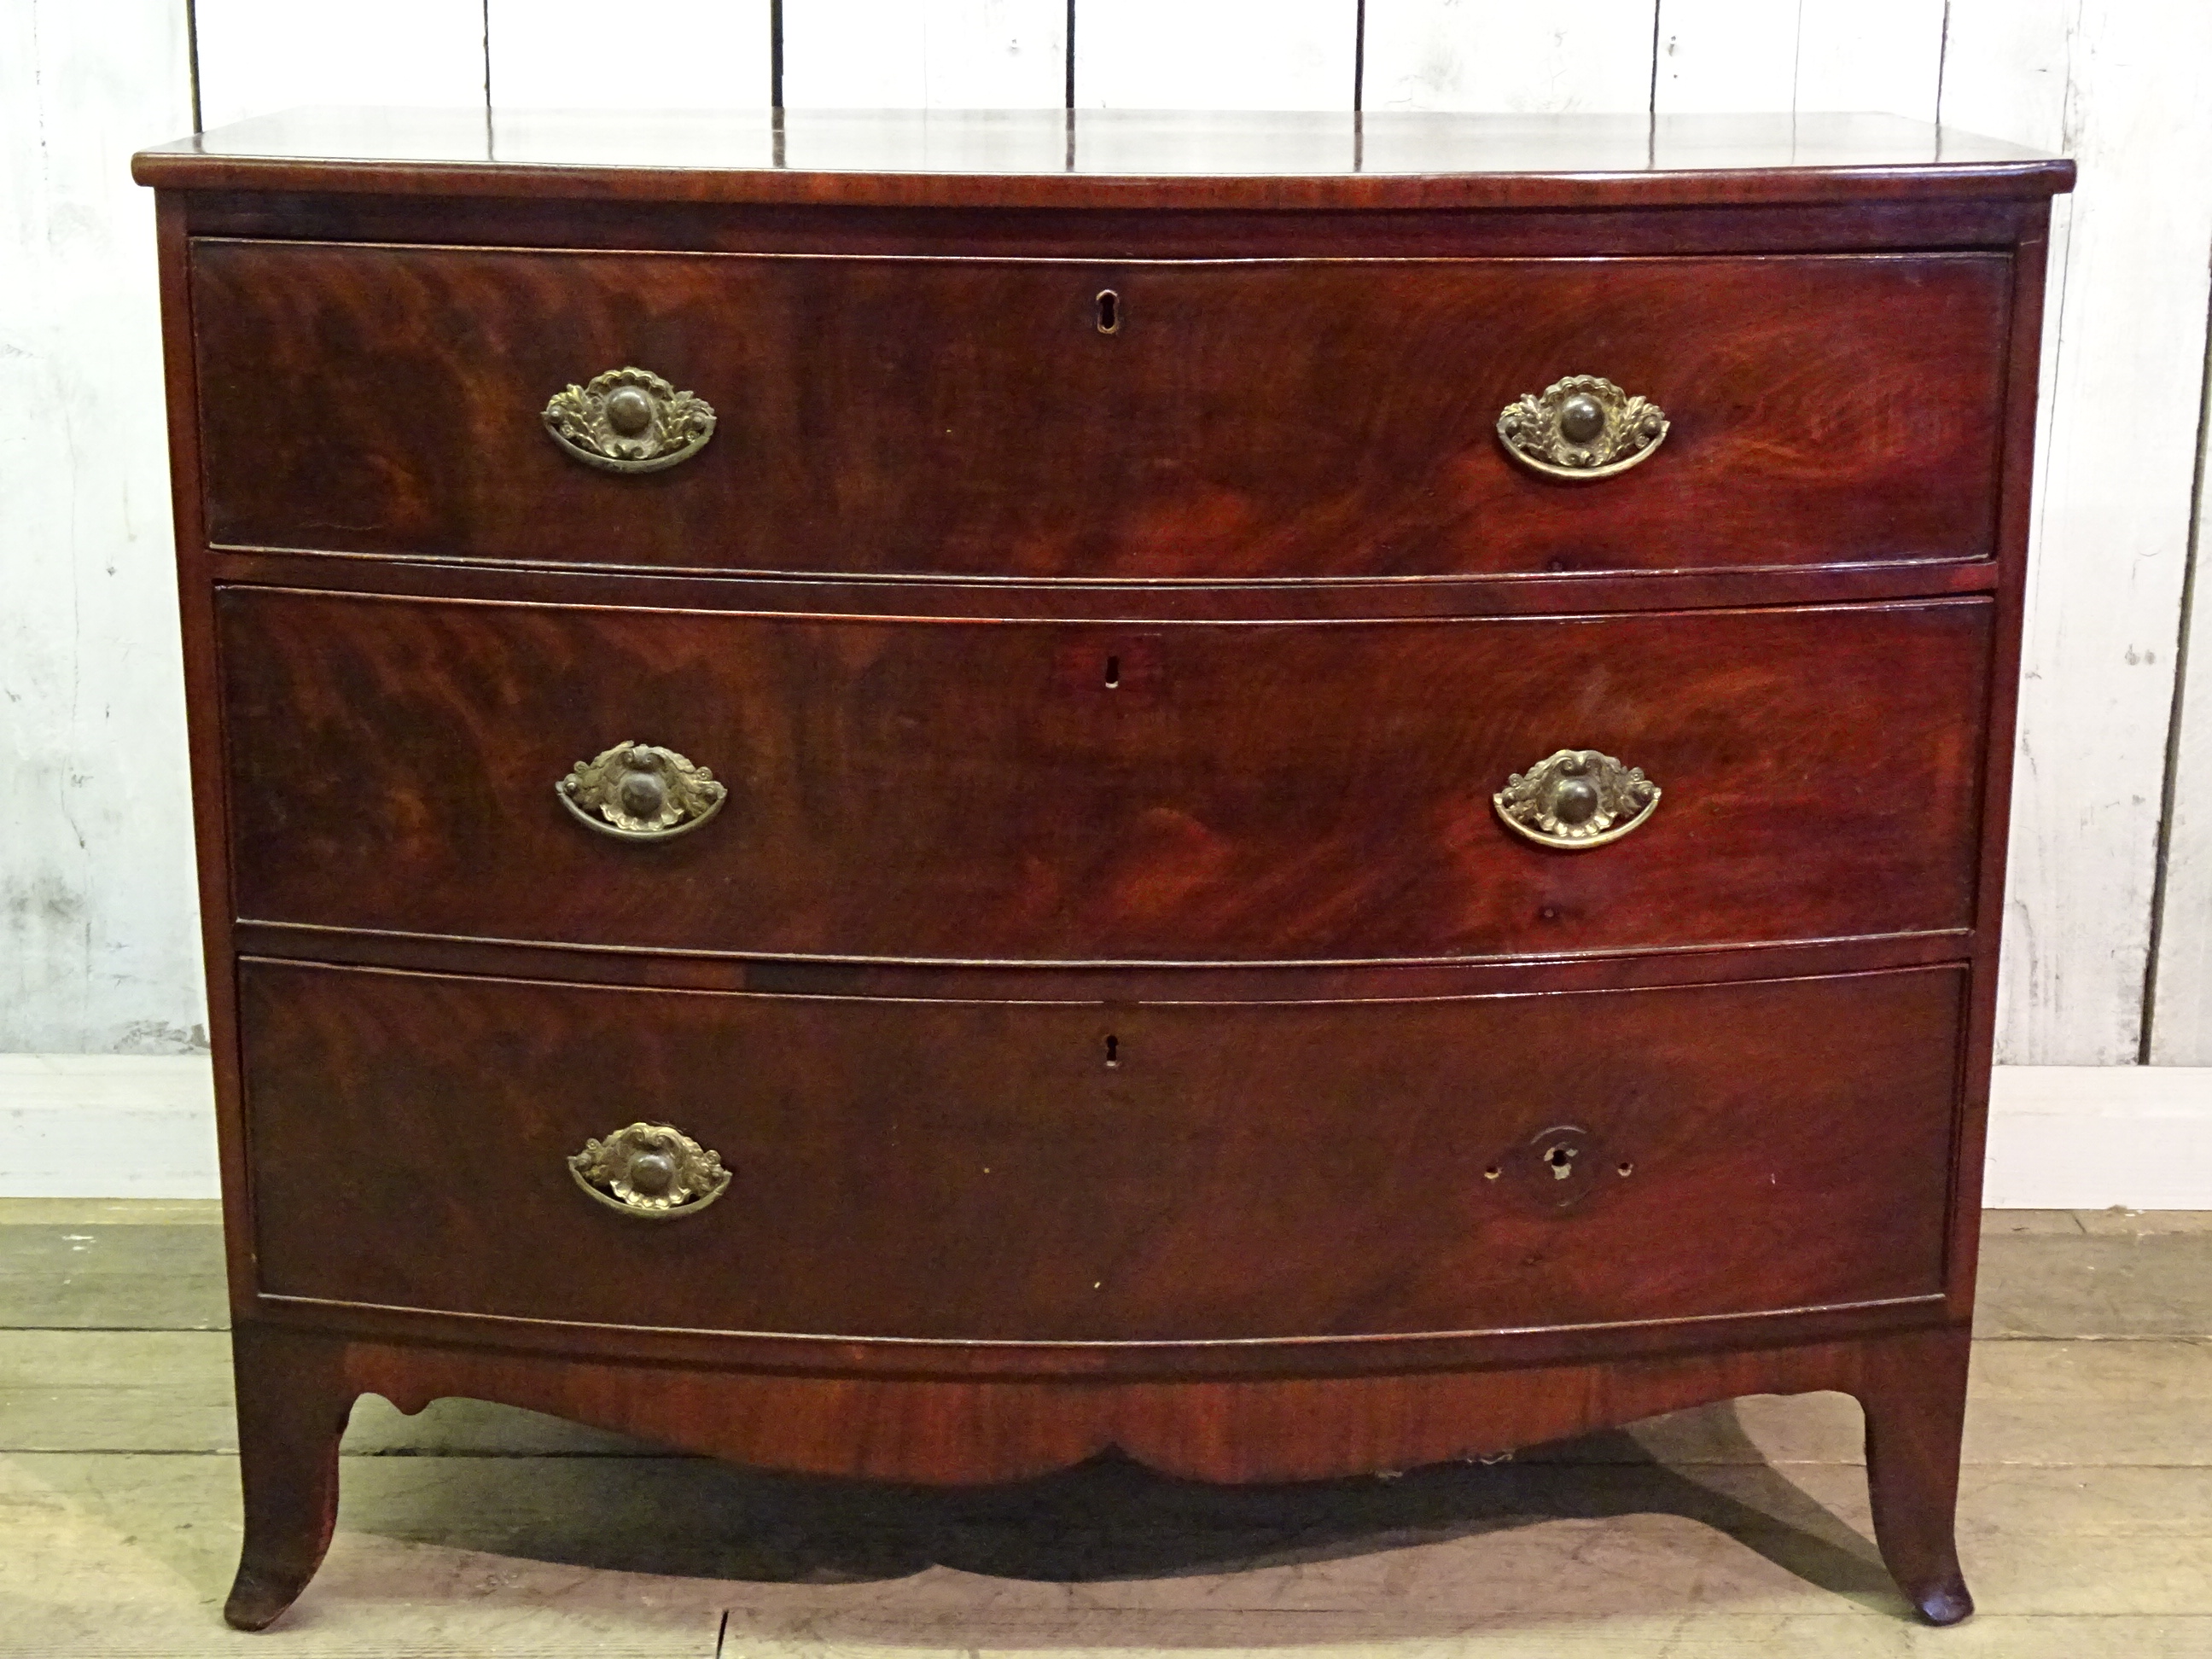 VICTORIAN MAHOGANY BOW FRONTED CHEST OF DRAWERS